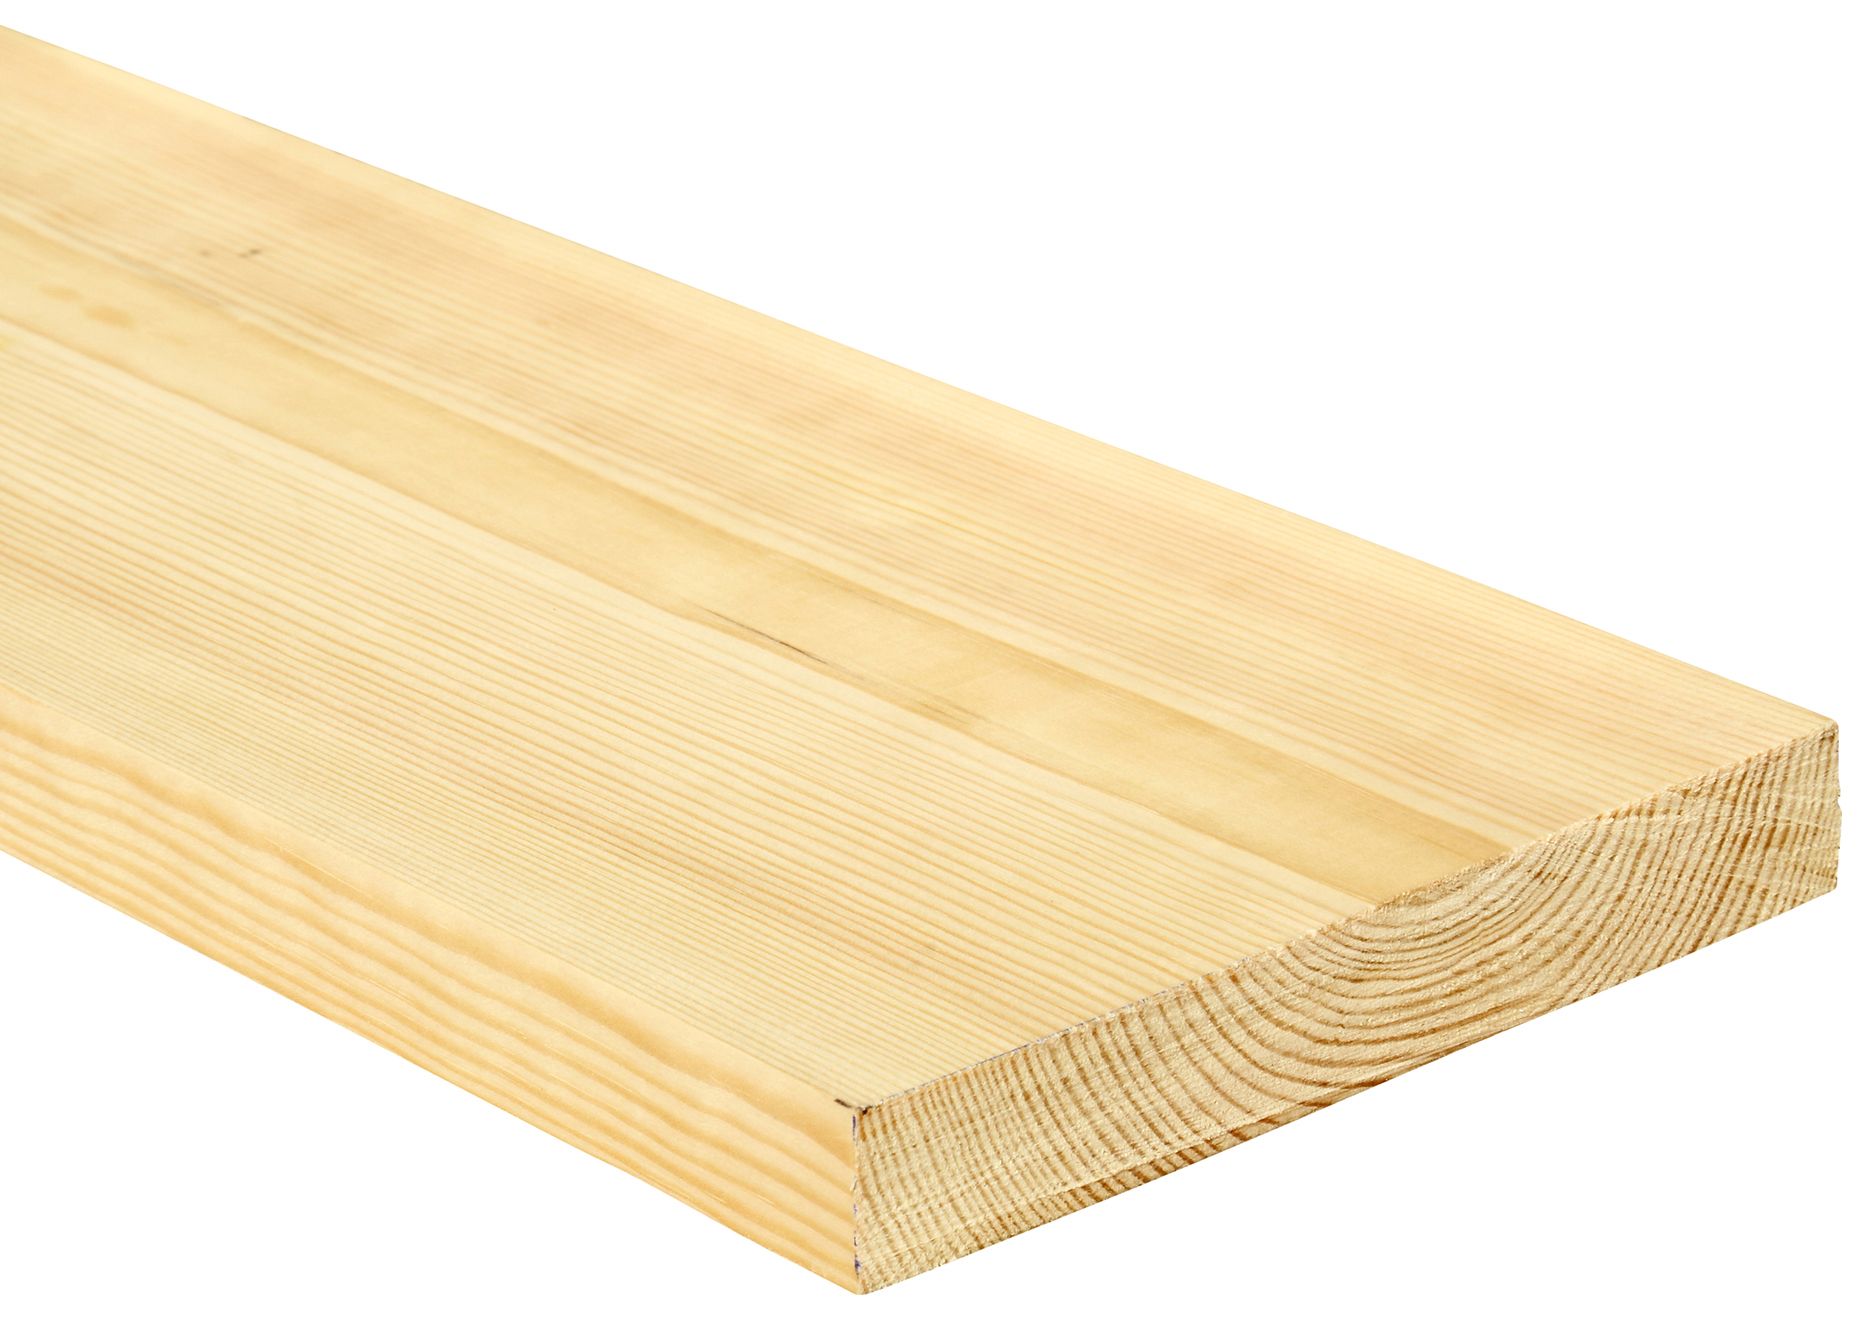 Image of Wickes Redwood PSE Timber - 20.5 x 144 x 1800mm